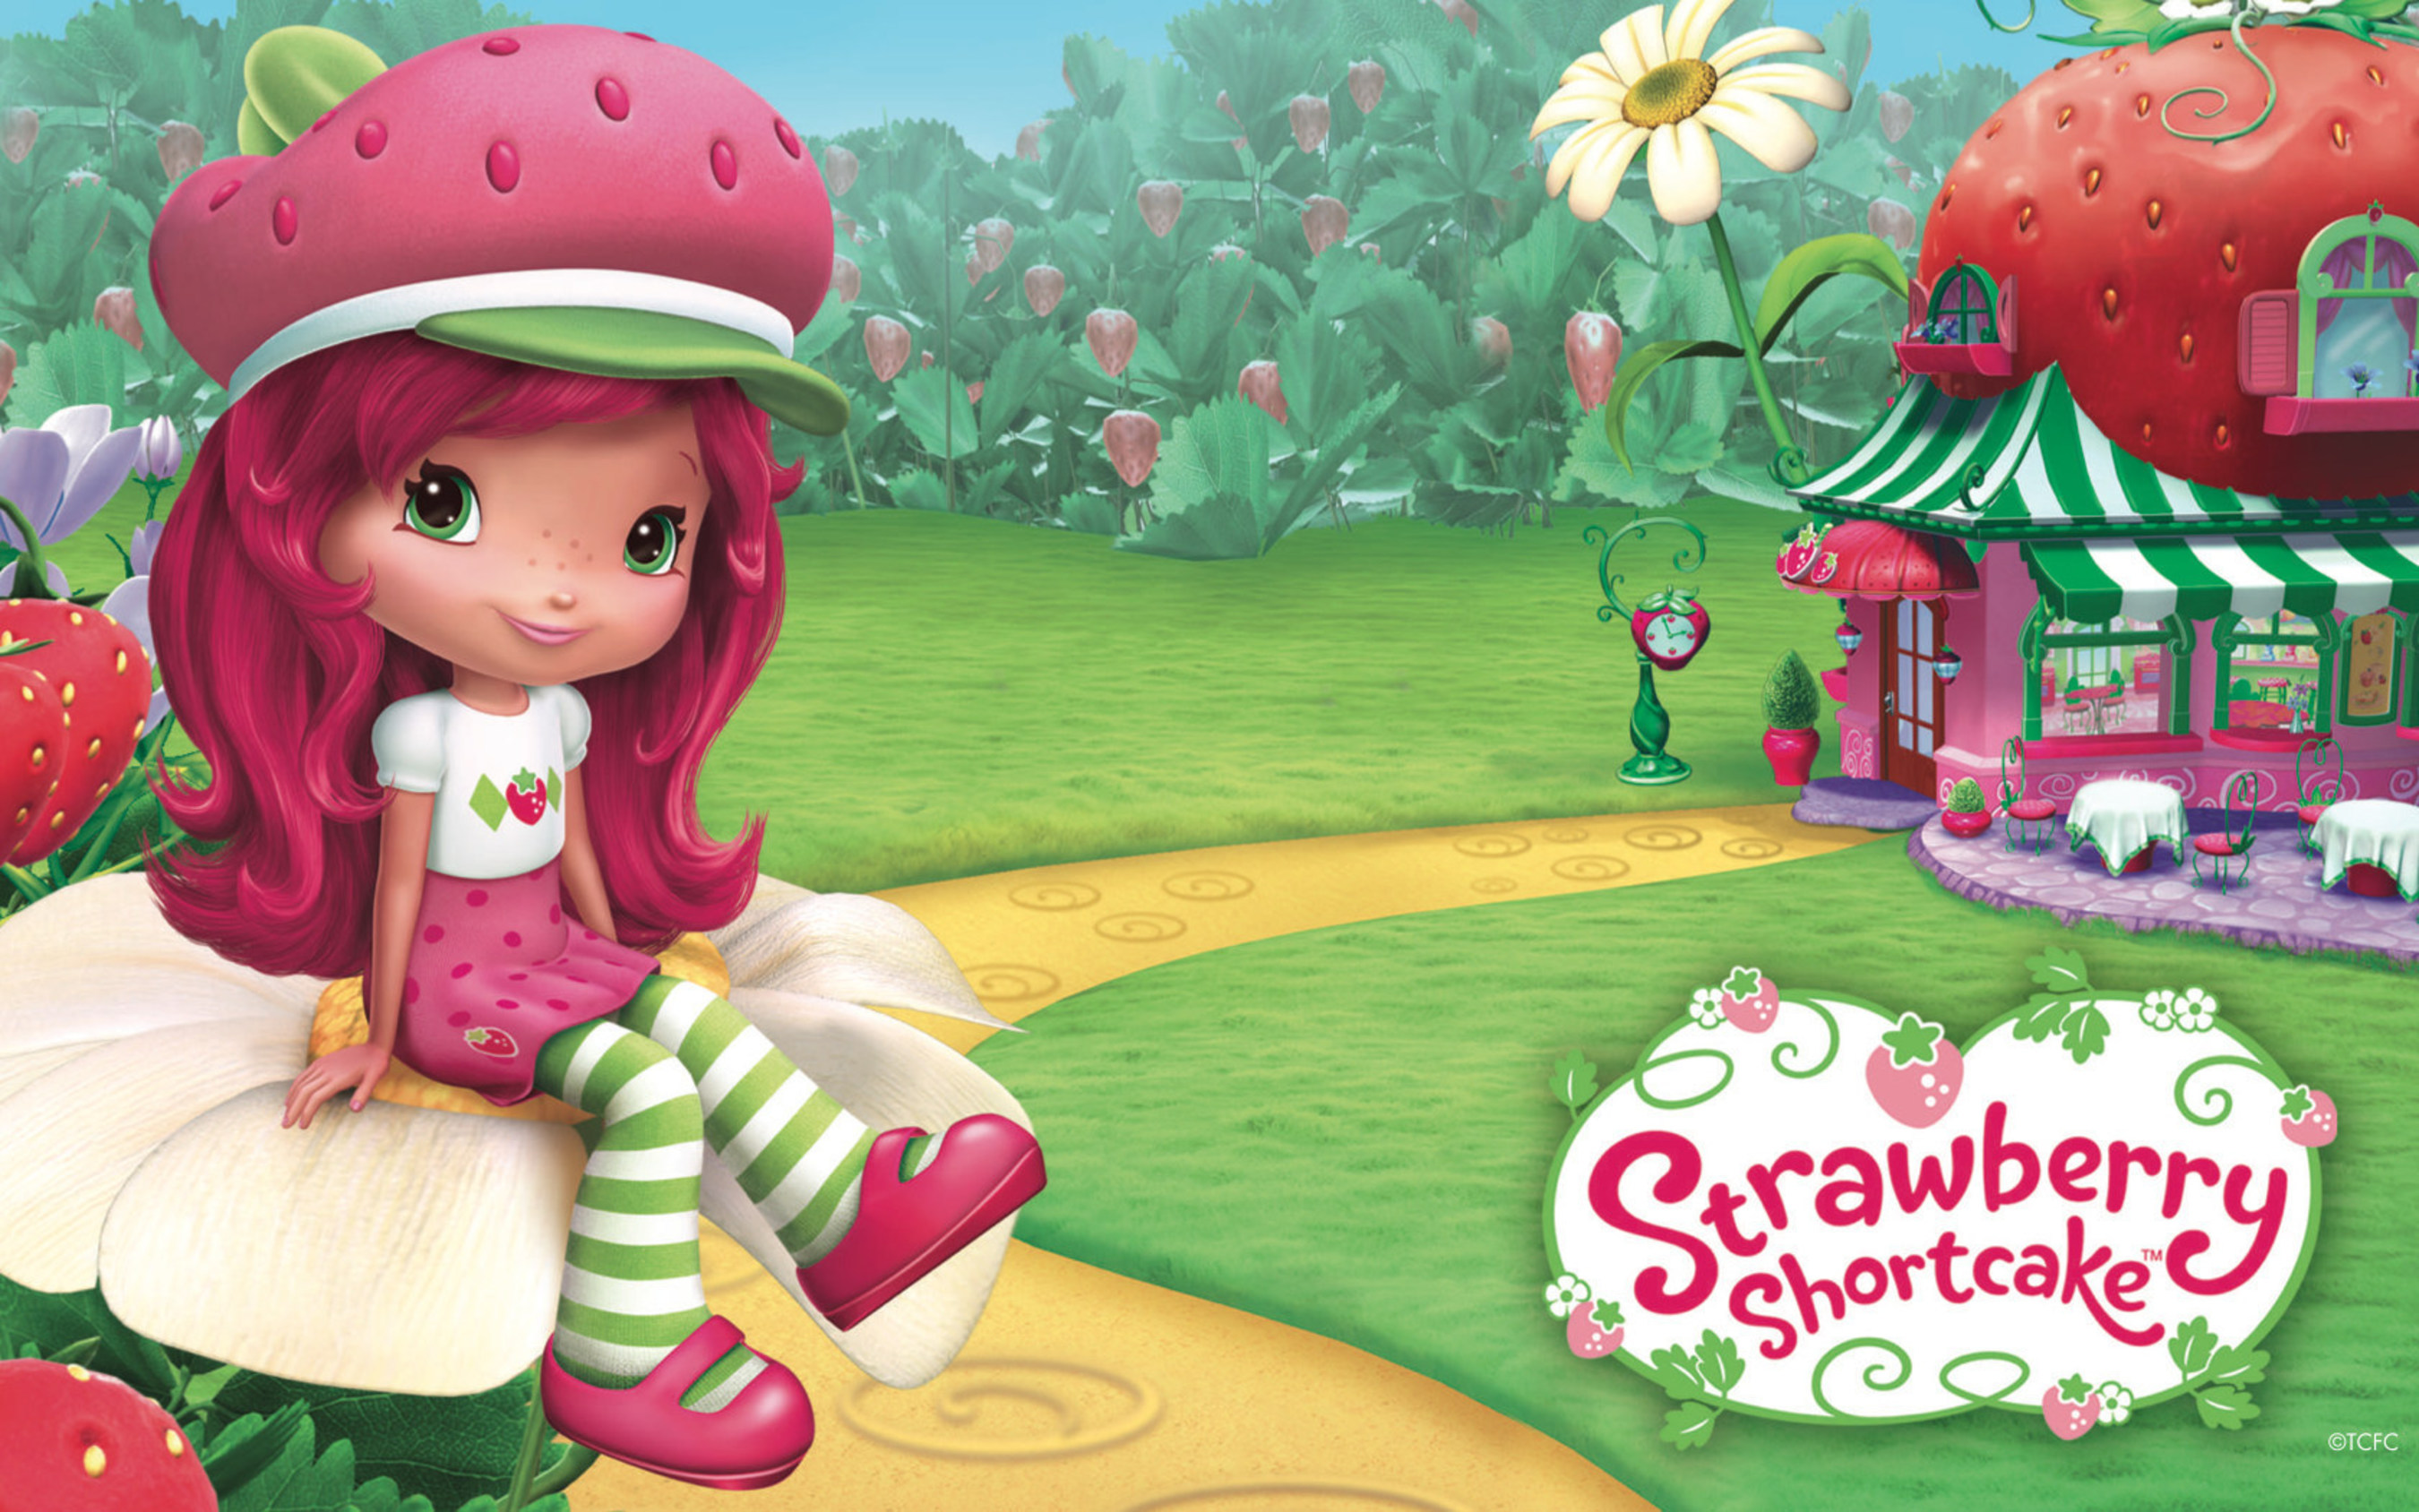 Iconix Announces Definitive Agreement To Acquire Strawberry Shortcake Brand